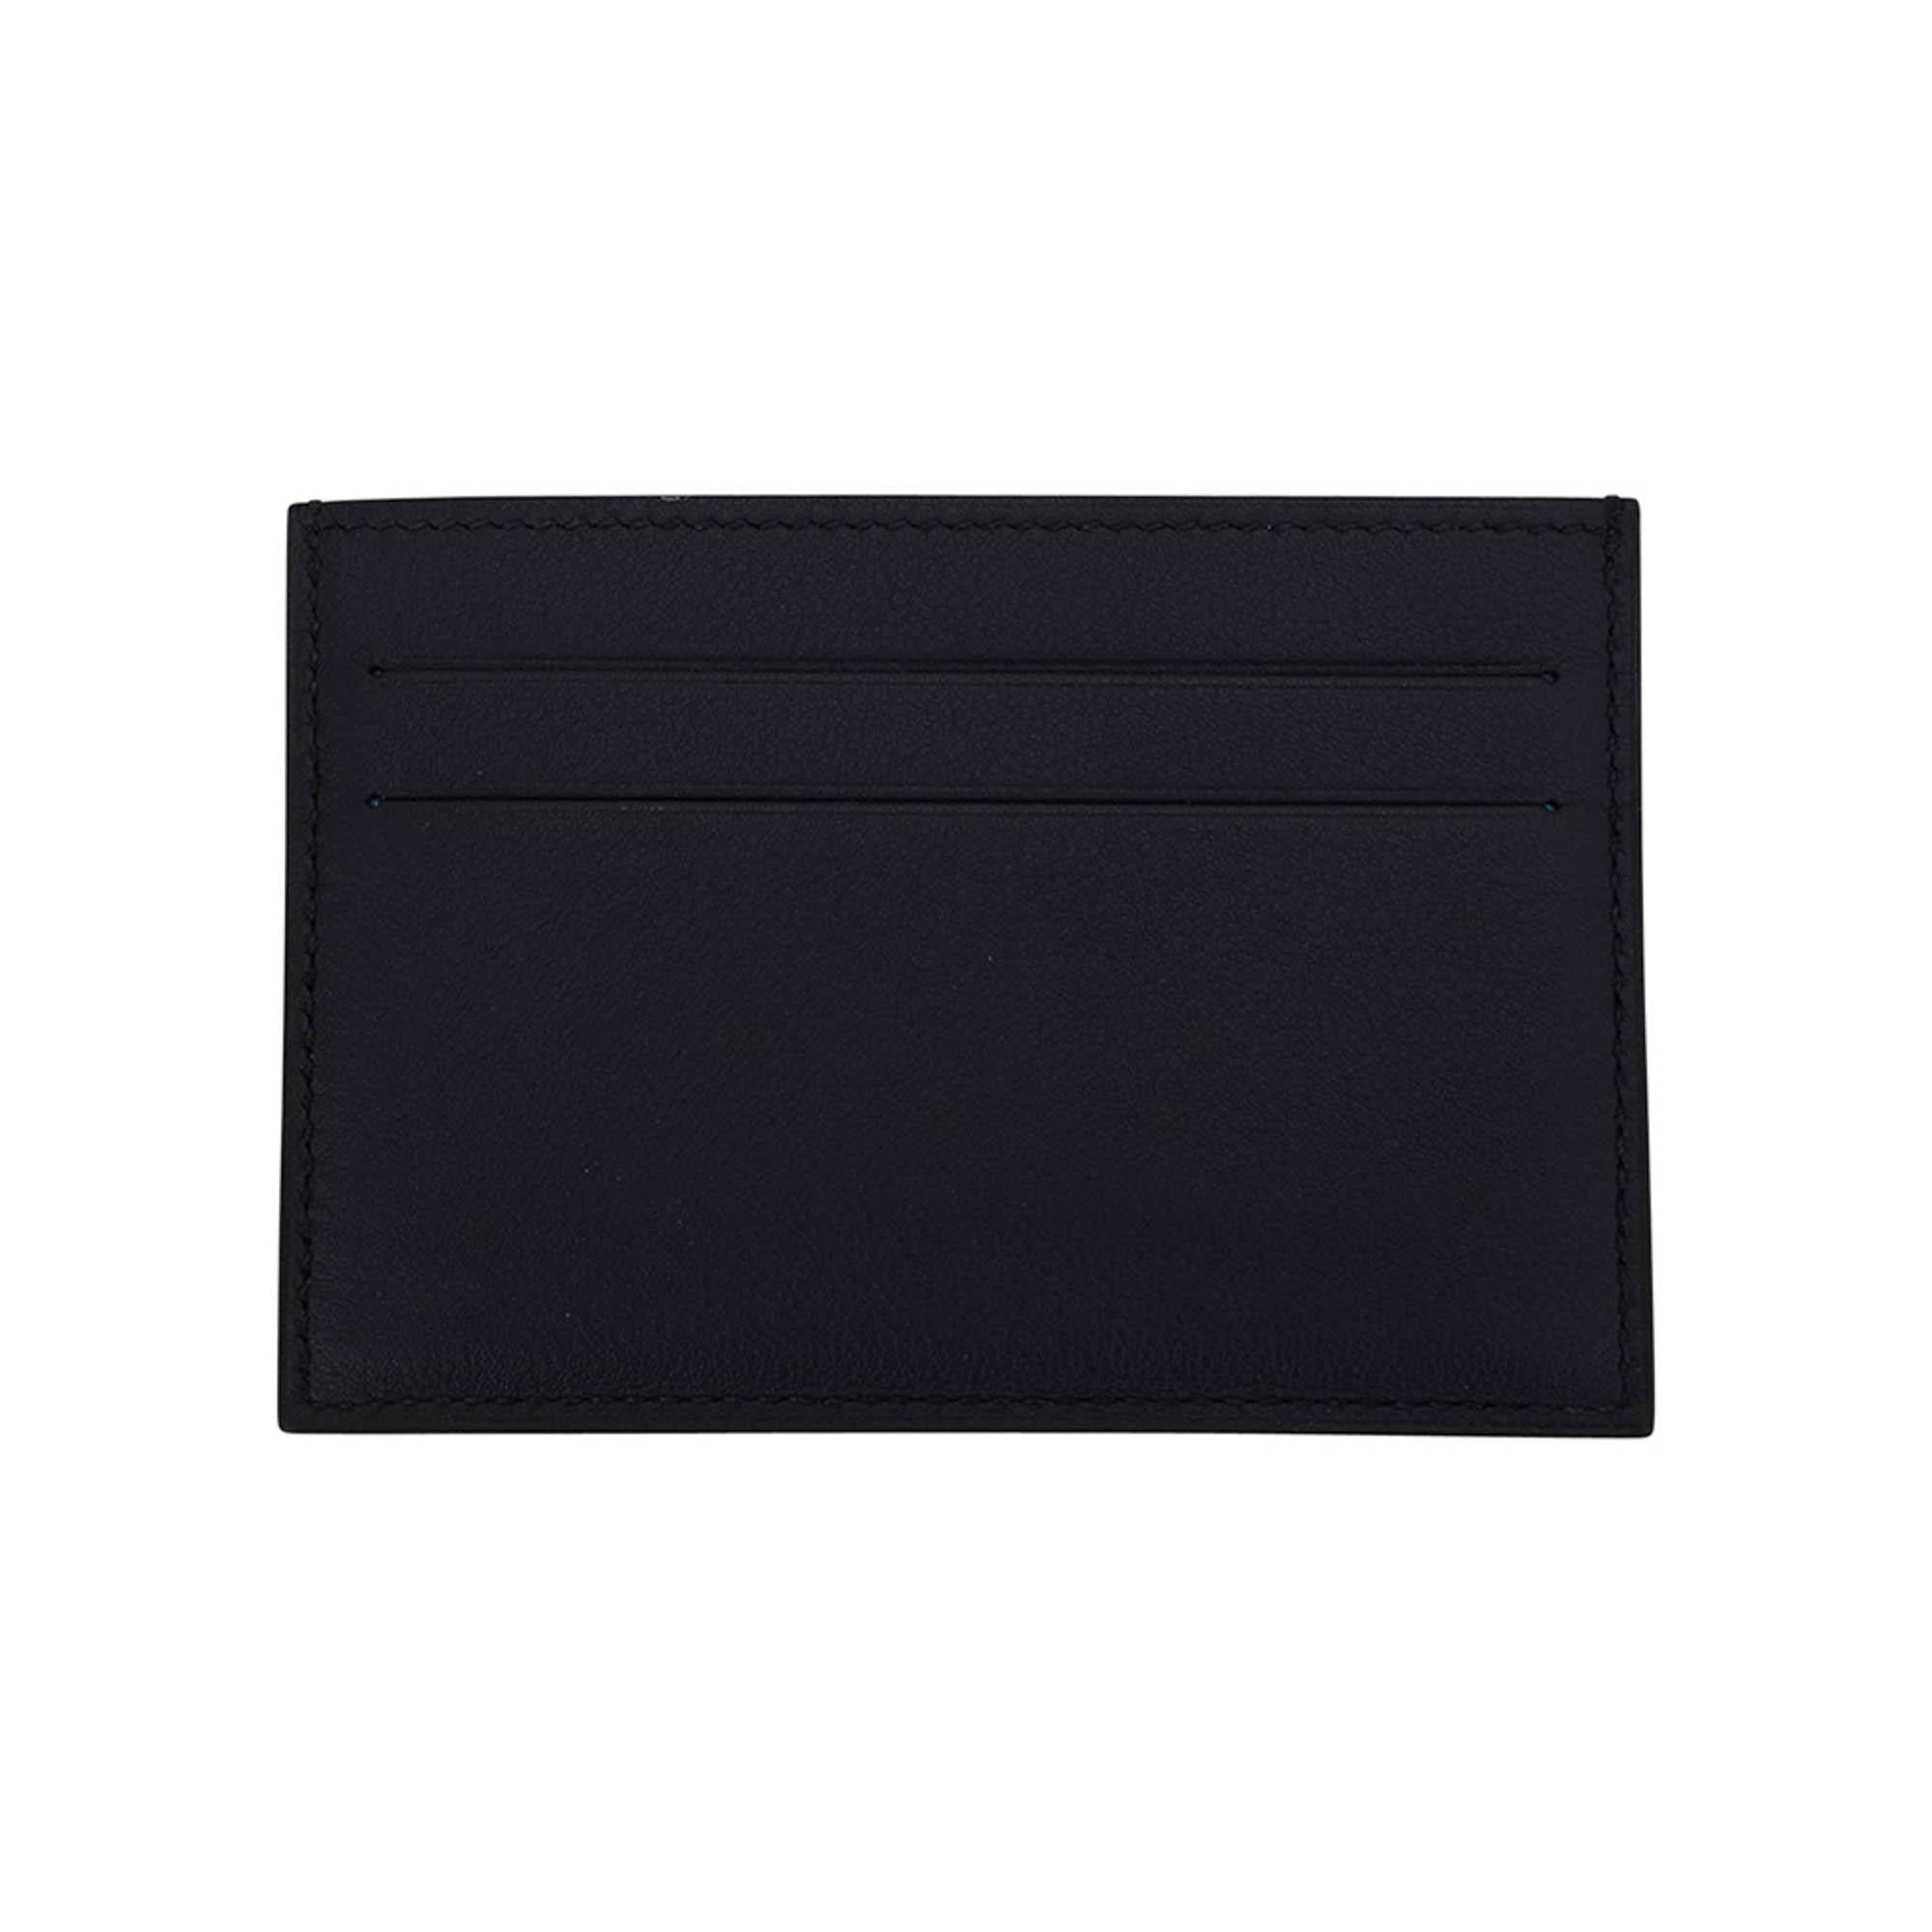 Hermes Citizen Twill Card Holder Black with Polka Dot Printed Silk Lining In New Condition For Sale In Miami, FL